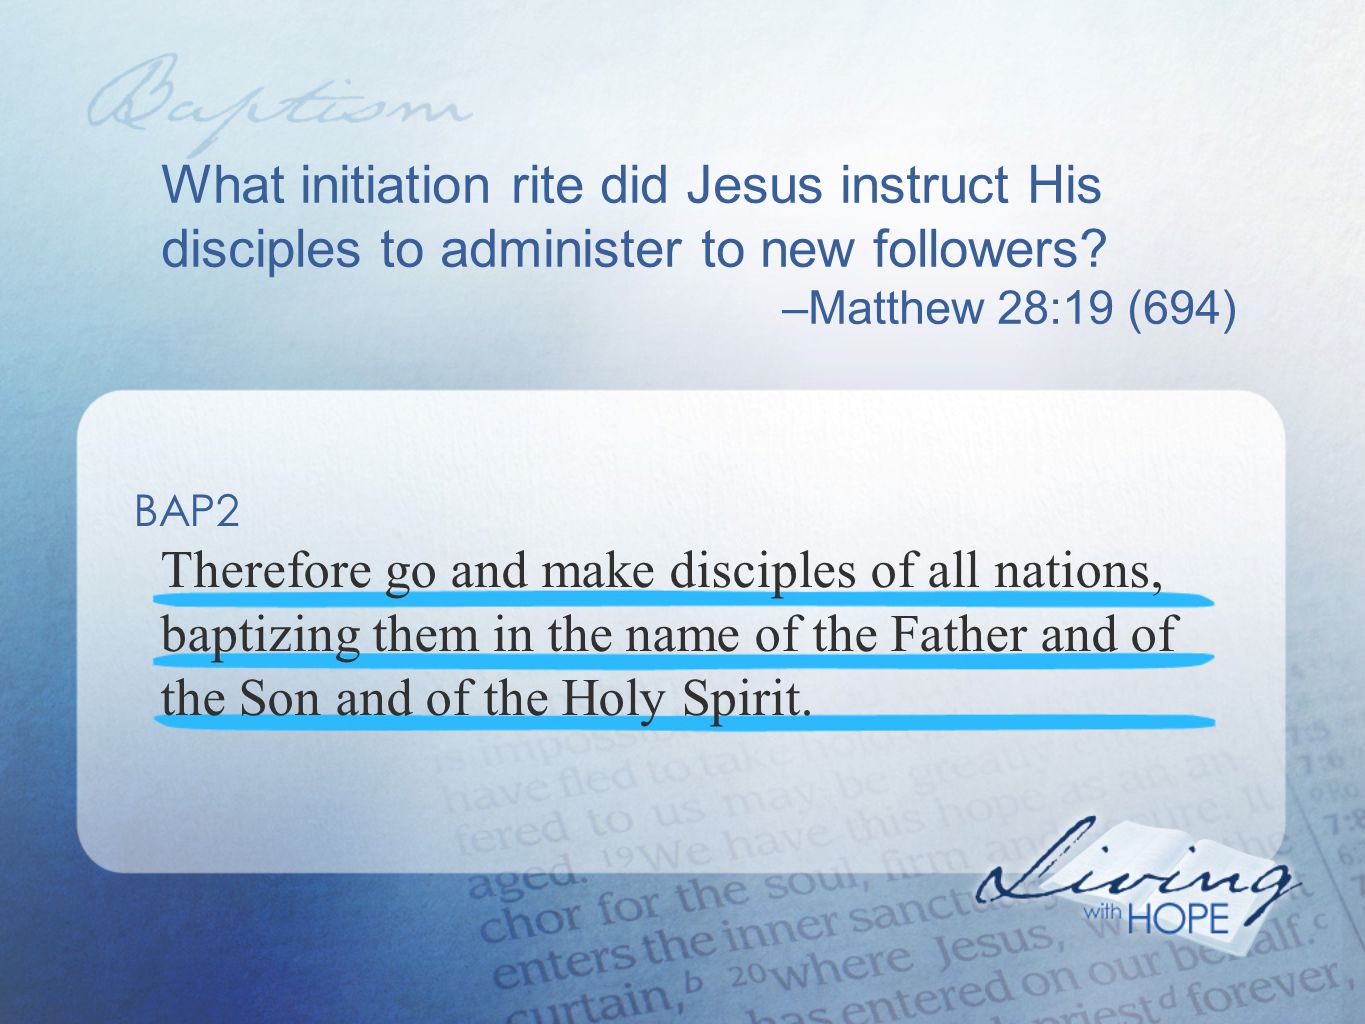 What initiation rite did Jesus instruct His disciples to administer to new followers.